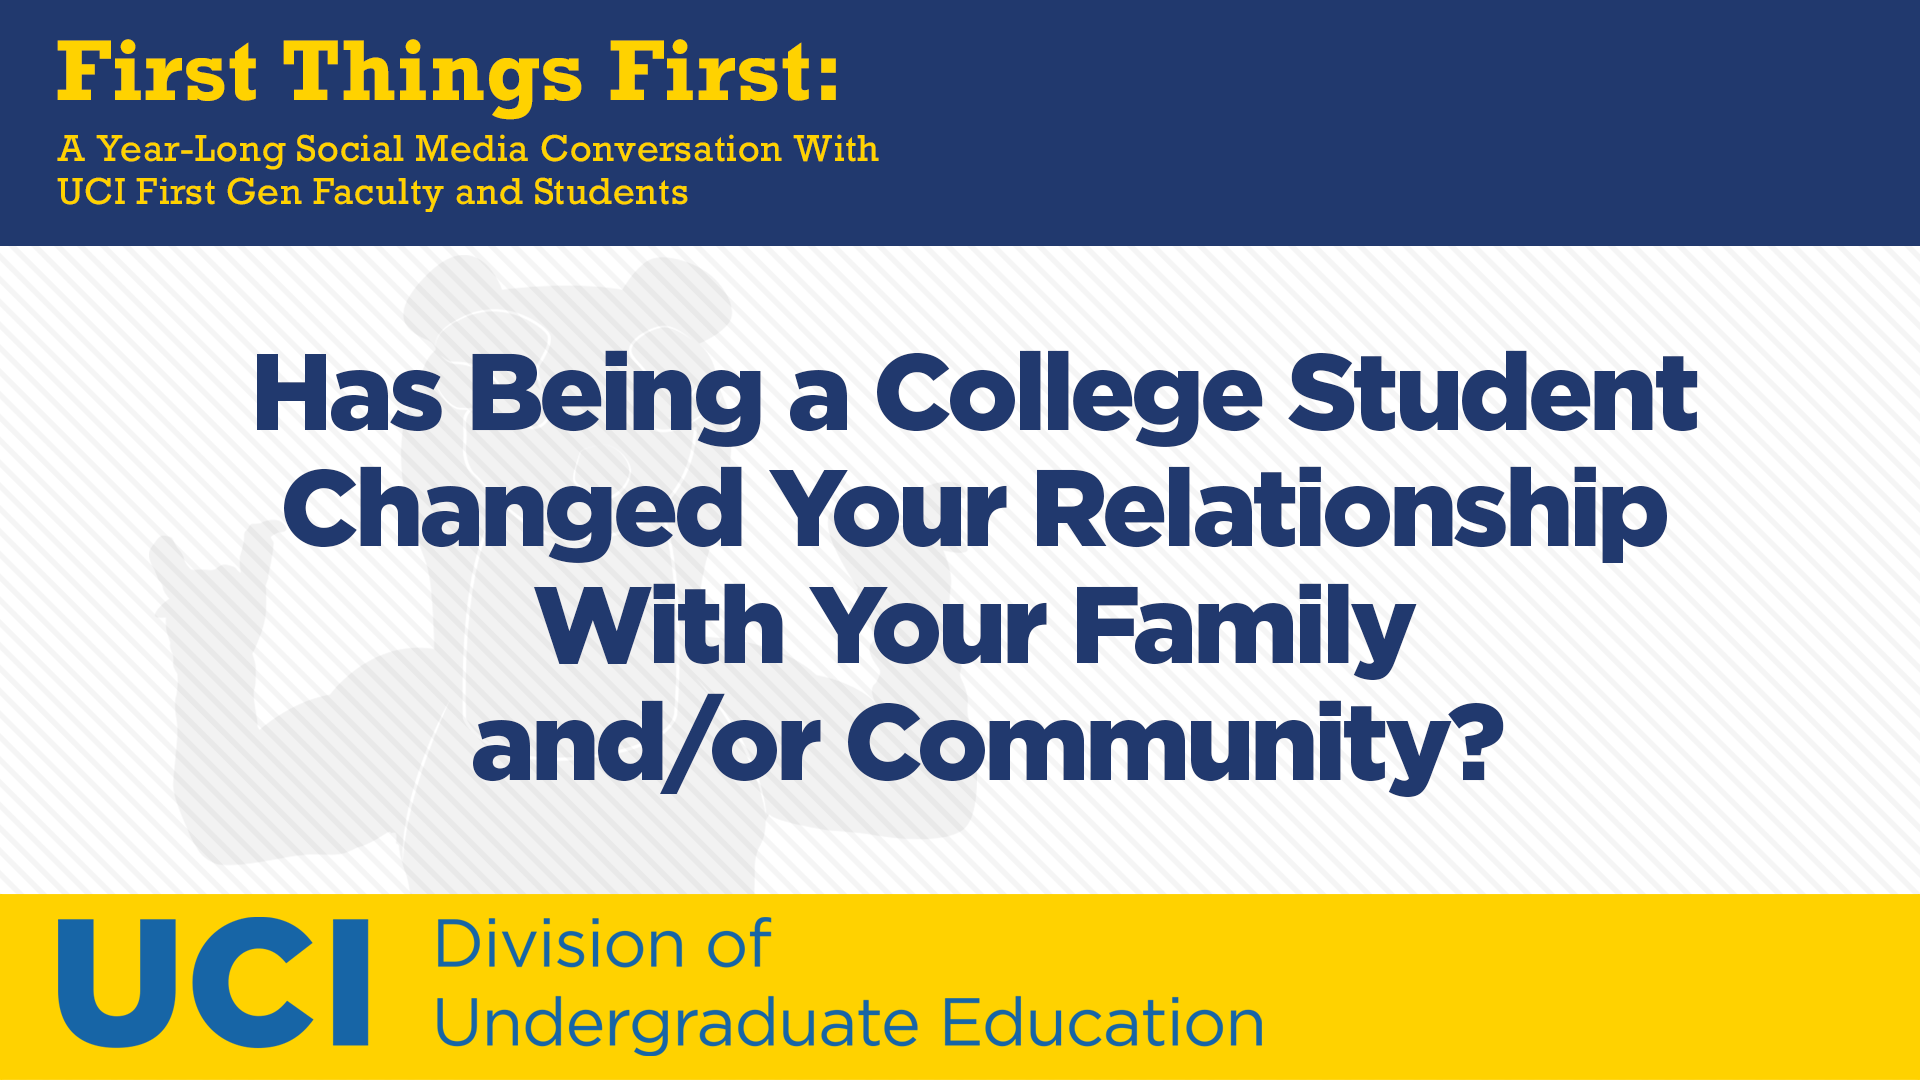 Has Being a College Student Changed Your Relationship With Your Family and/or Community?